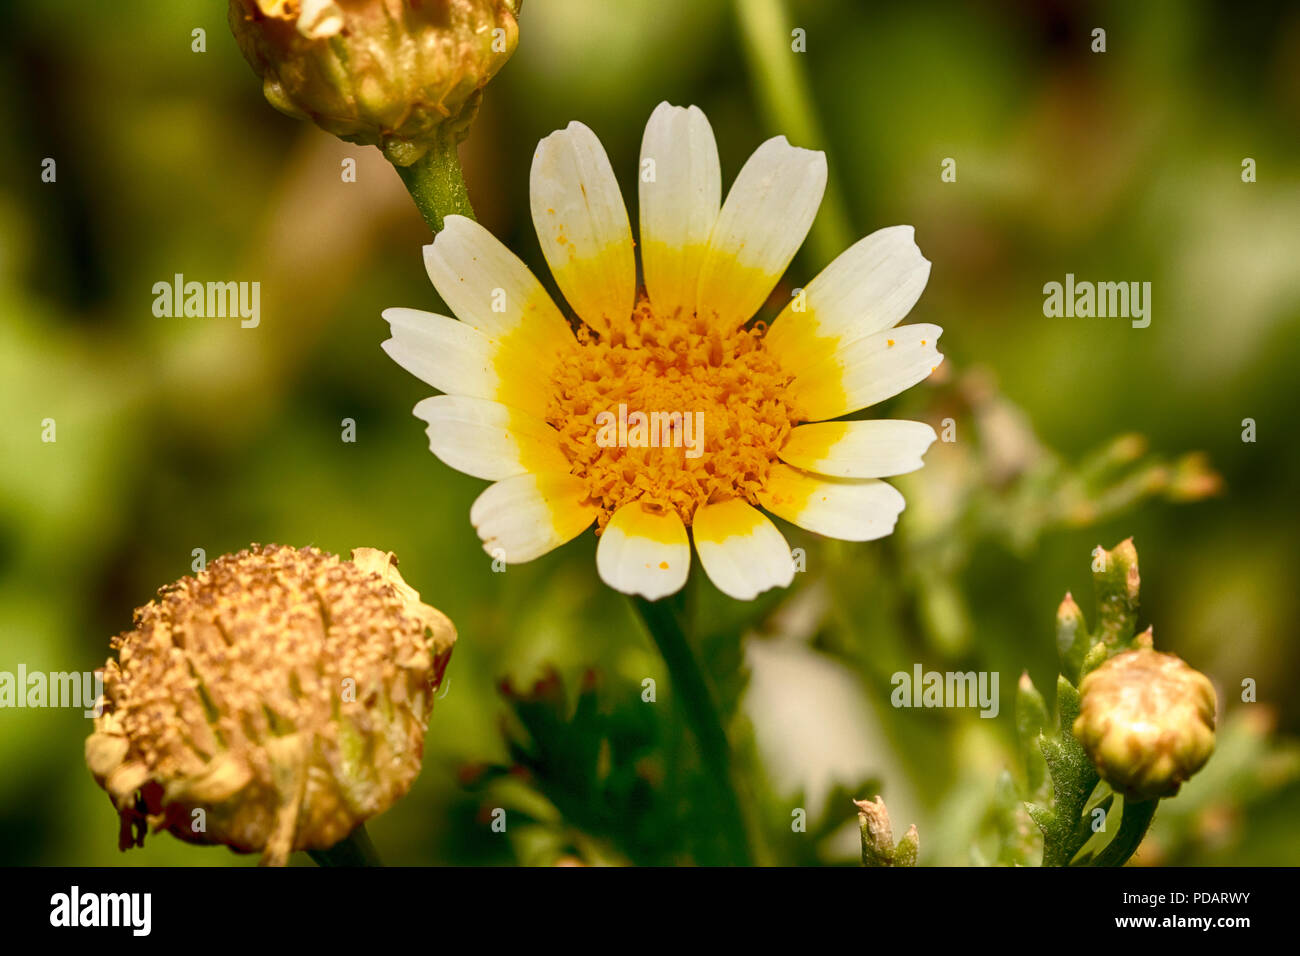 White flower with yellow center Stock Photo